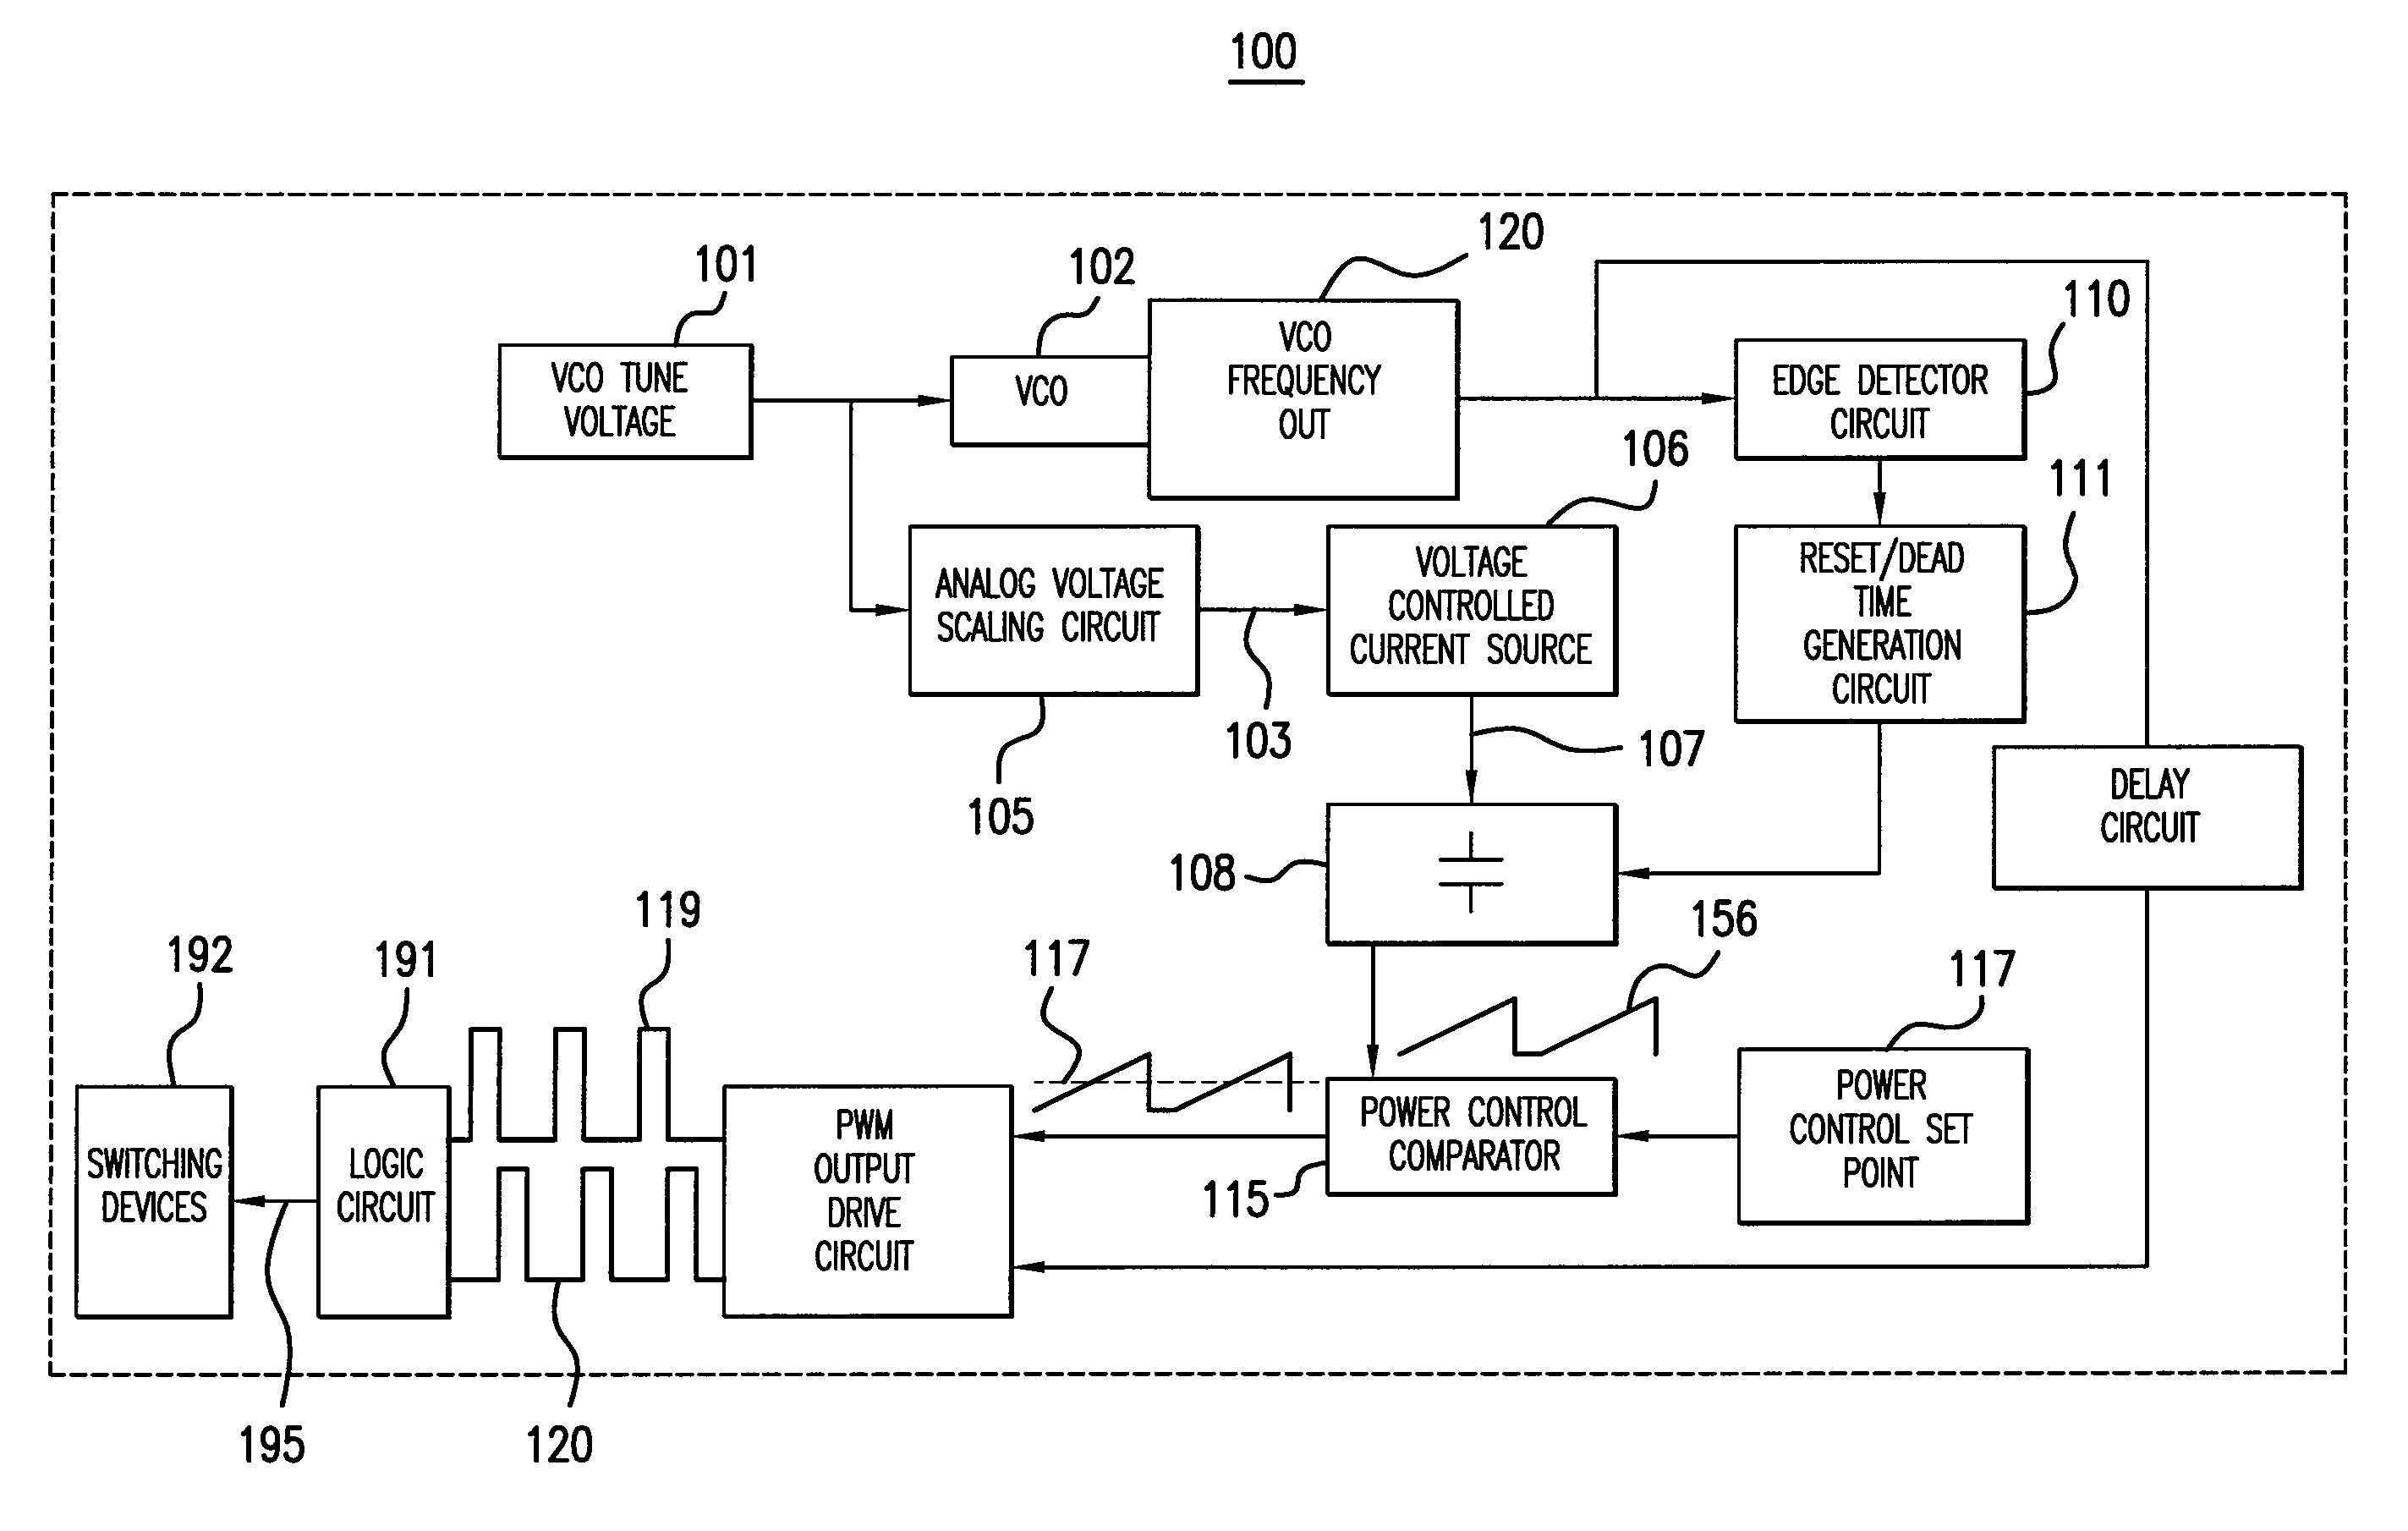 Automatic frequency compensation for pulse width modulated RF level control